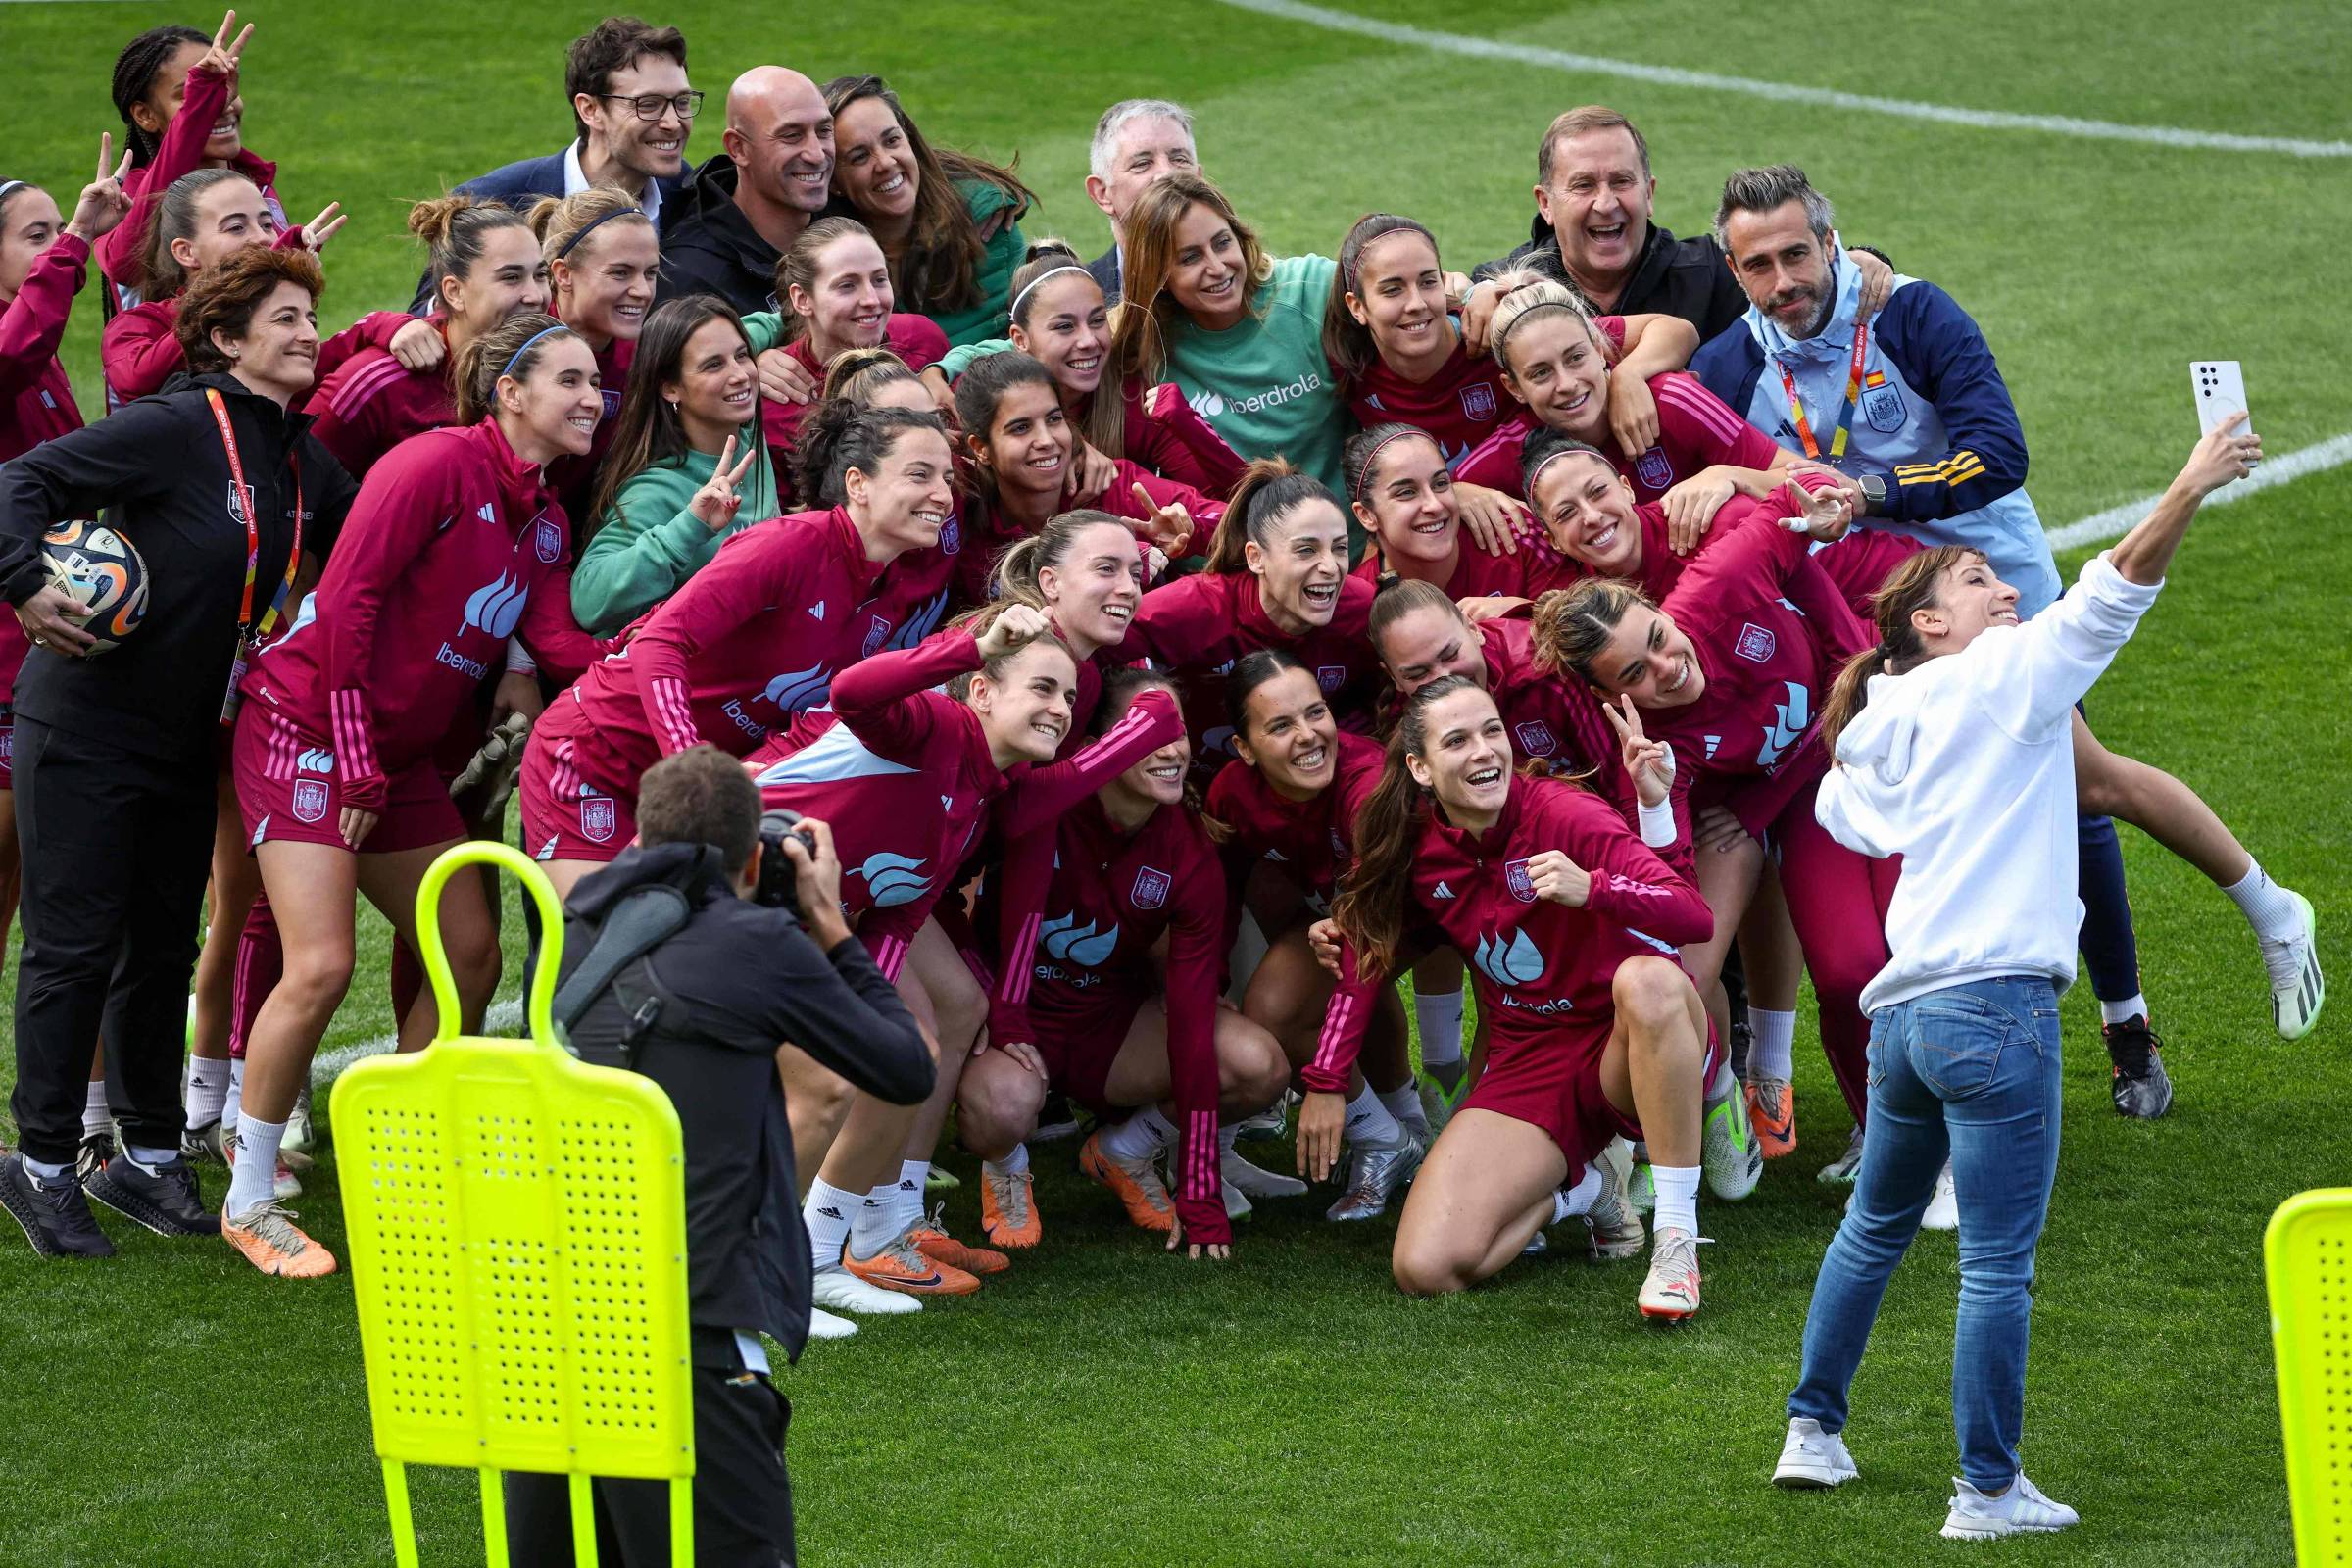 Opinion – Marina Izidro: Seriousness and investment led Spain and England to the World Cup final